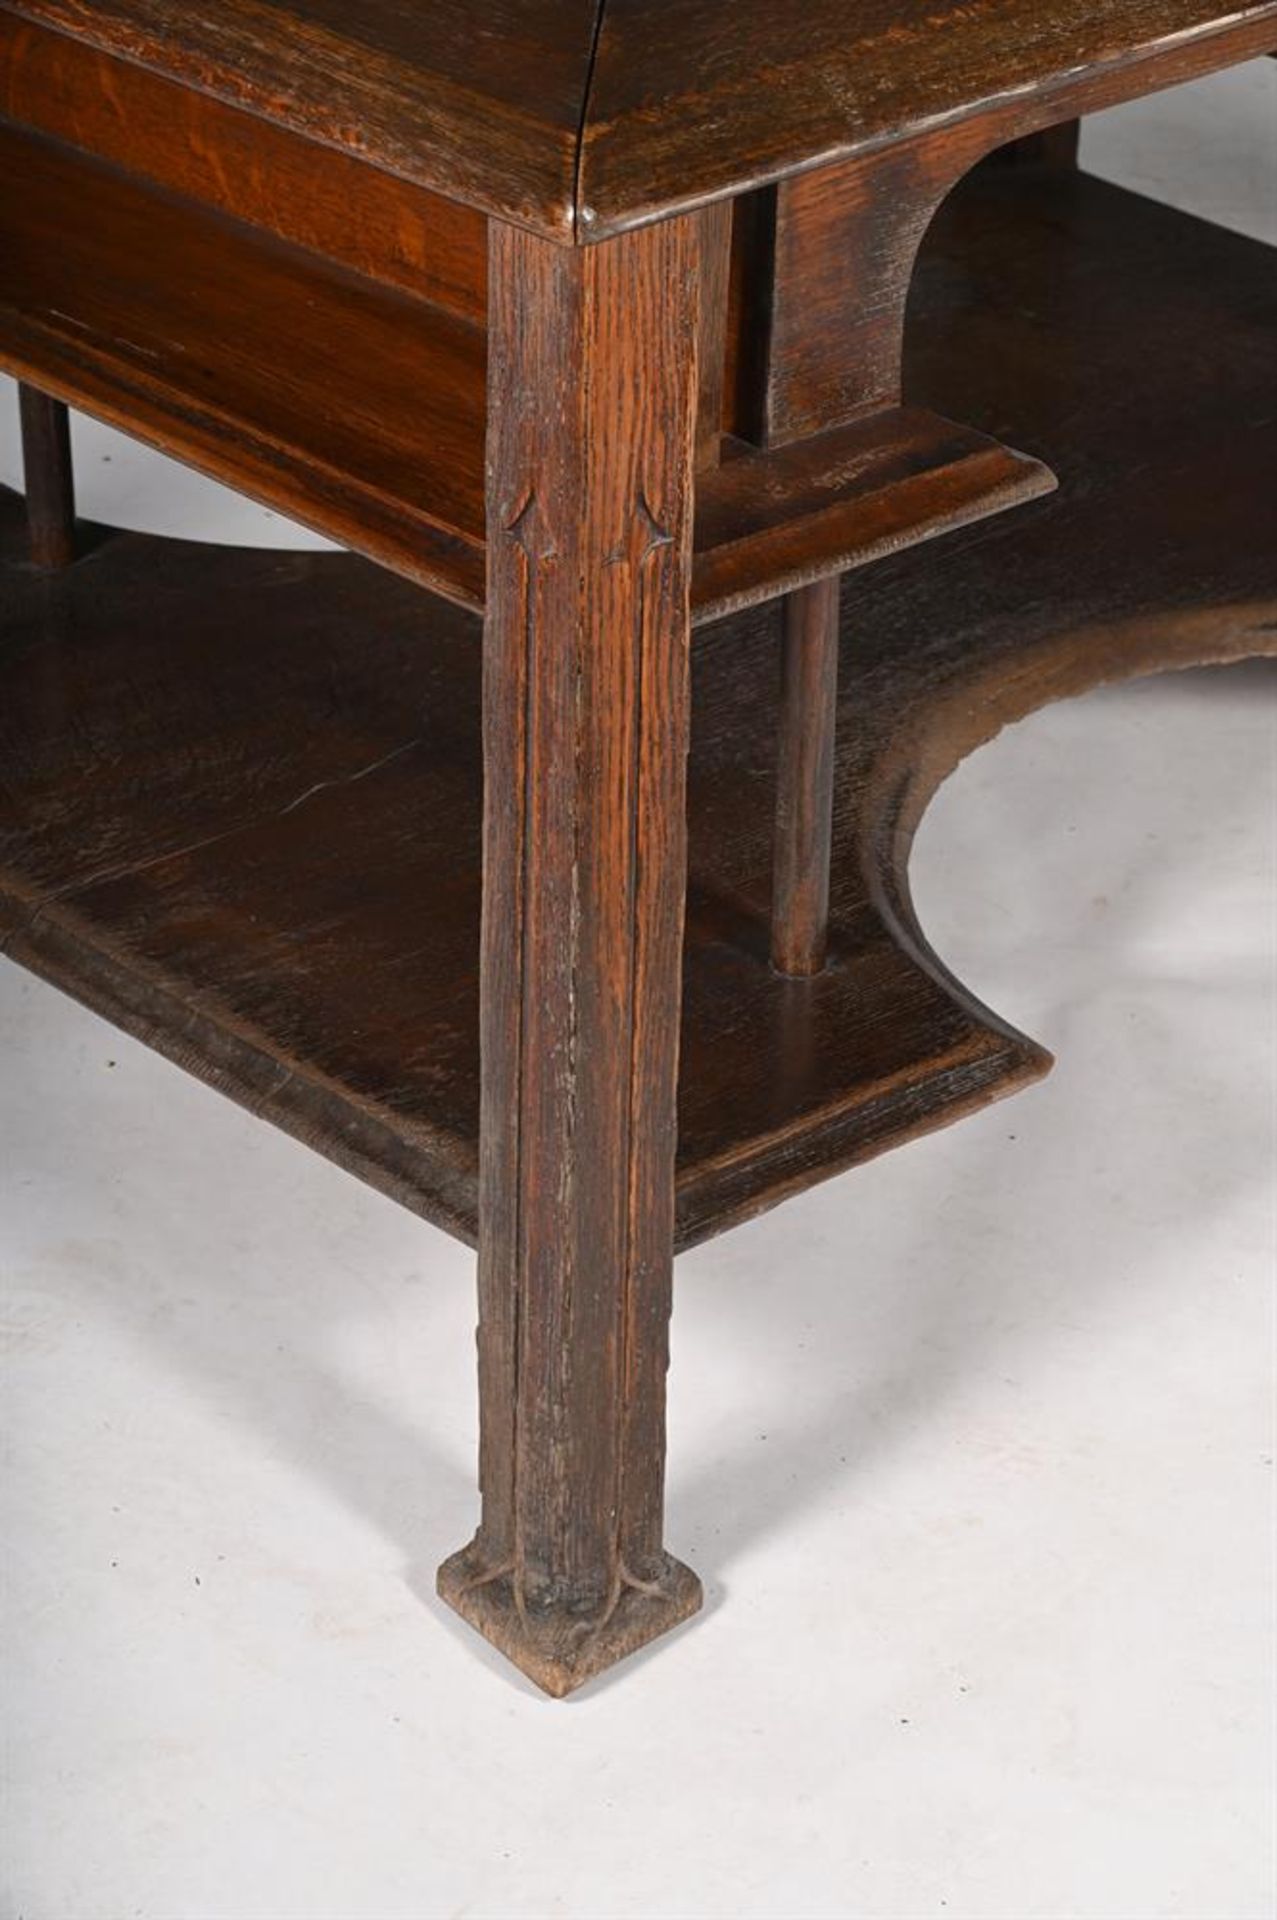 AN ARTS AND CRAFTS OAK WRITING TABLE CIRCA 1900 - Image 3 of 3